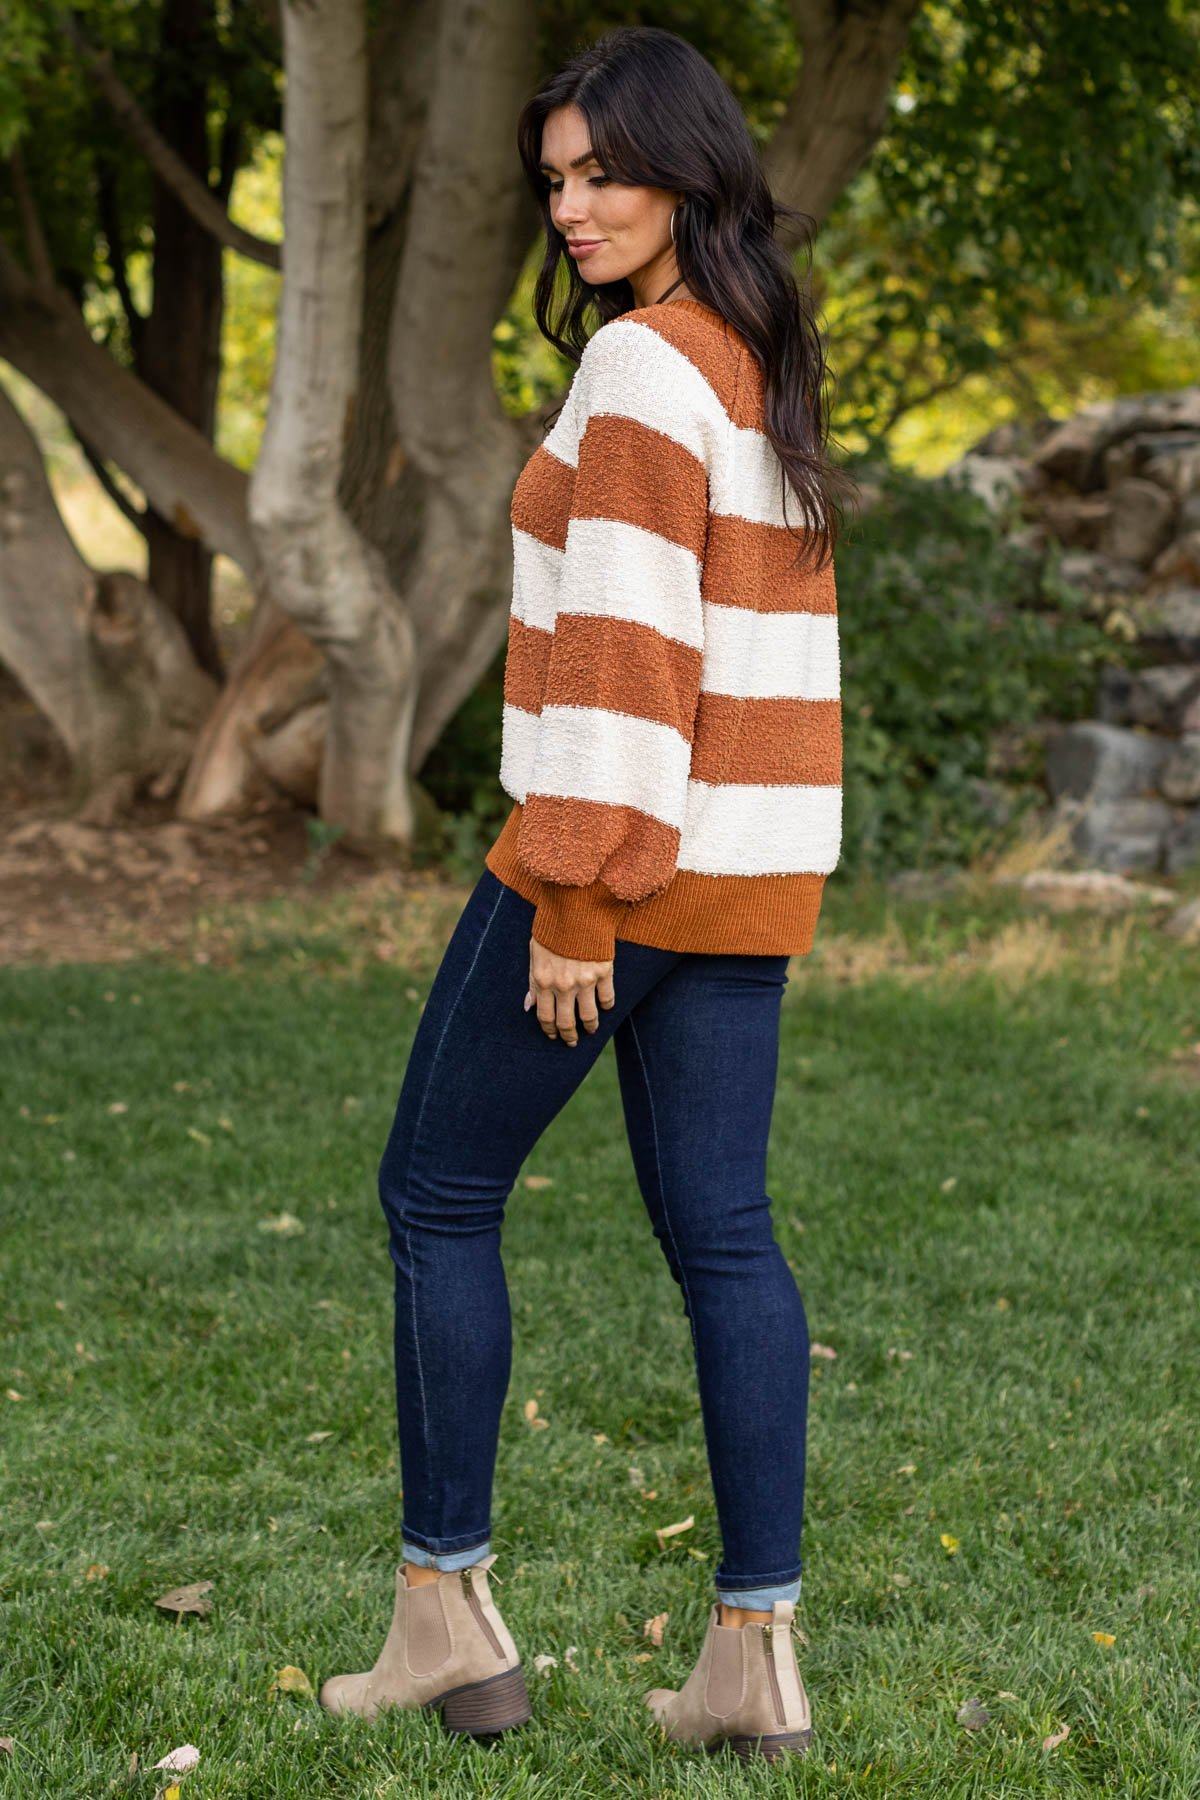 Cognac and Cream Striped Popcorn Knit Sweater - Filly Flair